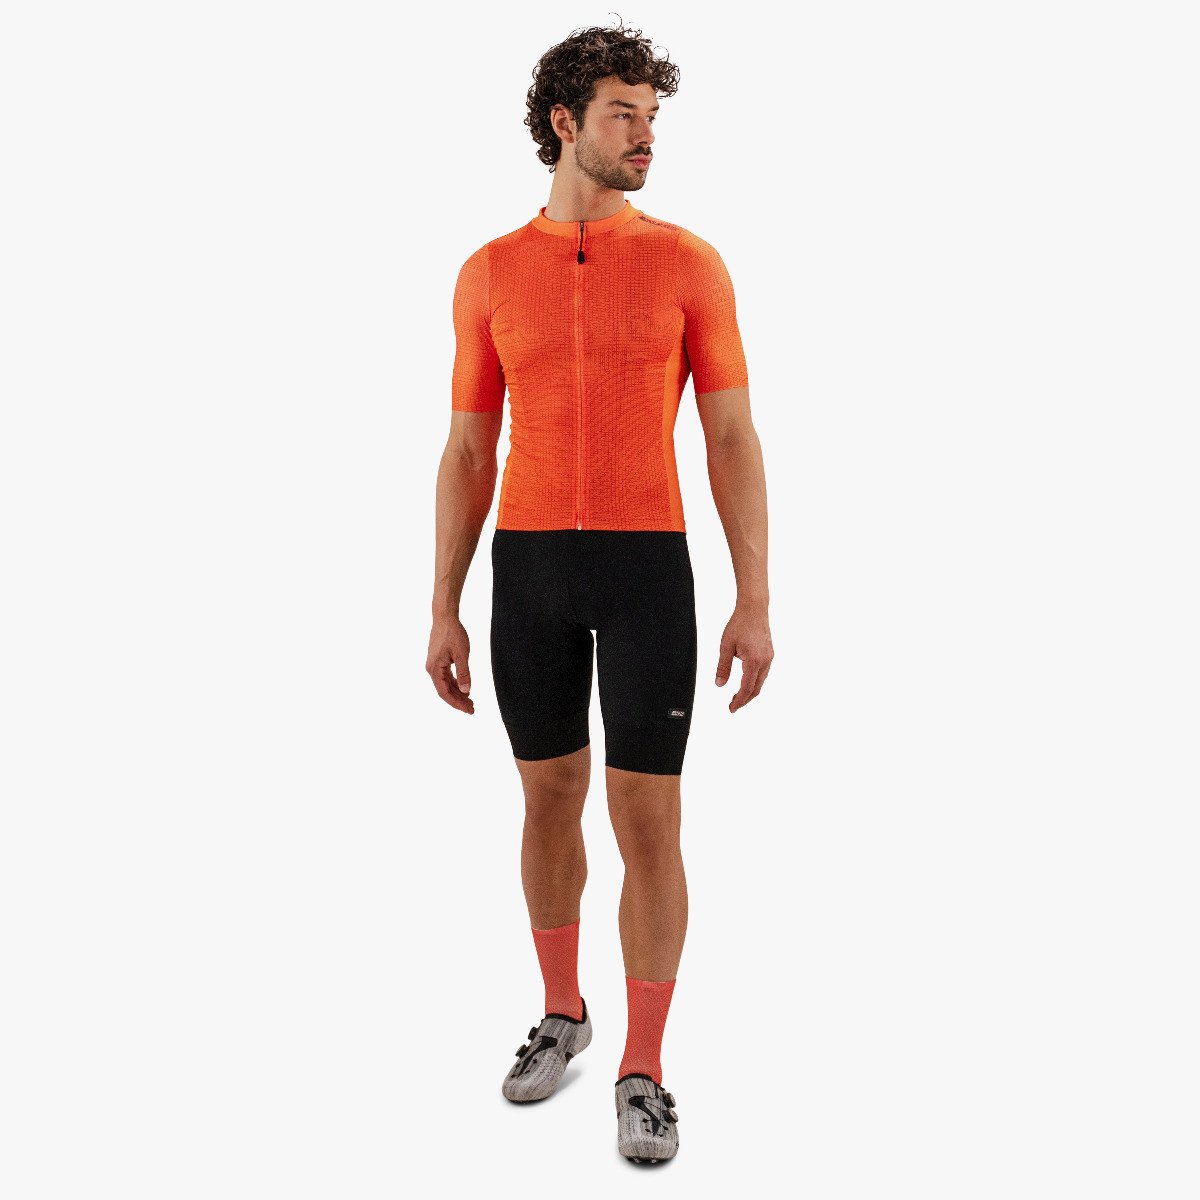 cycling jersey x over 9.5 summer short sleeve orange fluo scicon cj11008